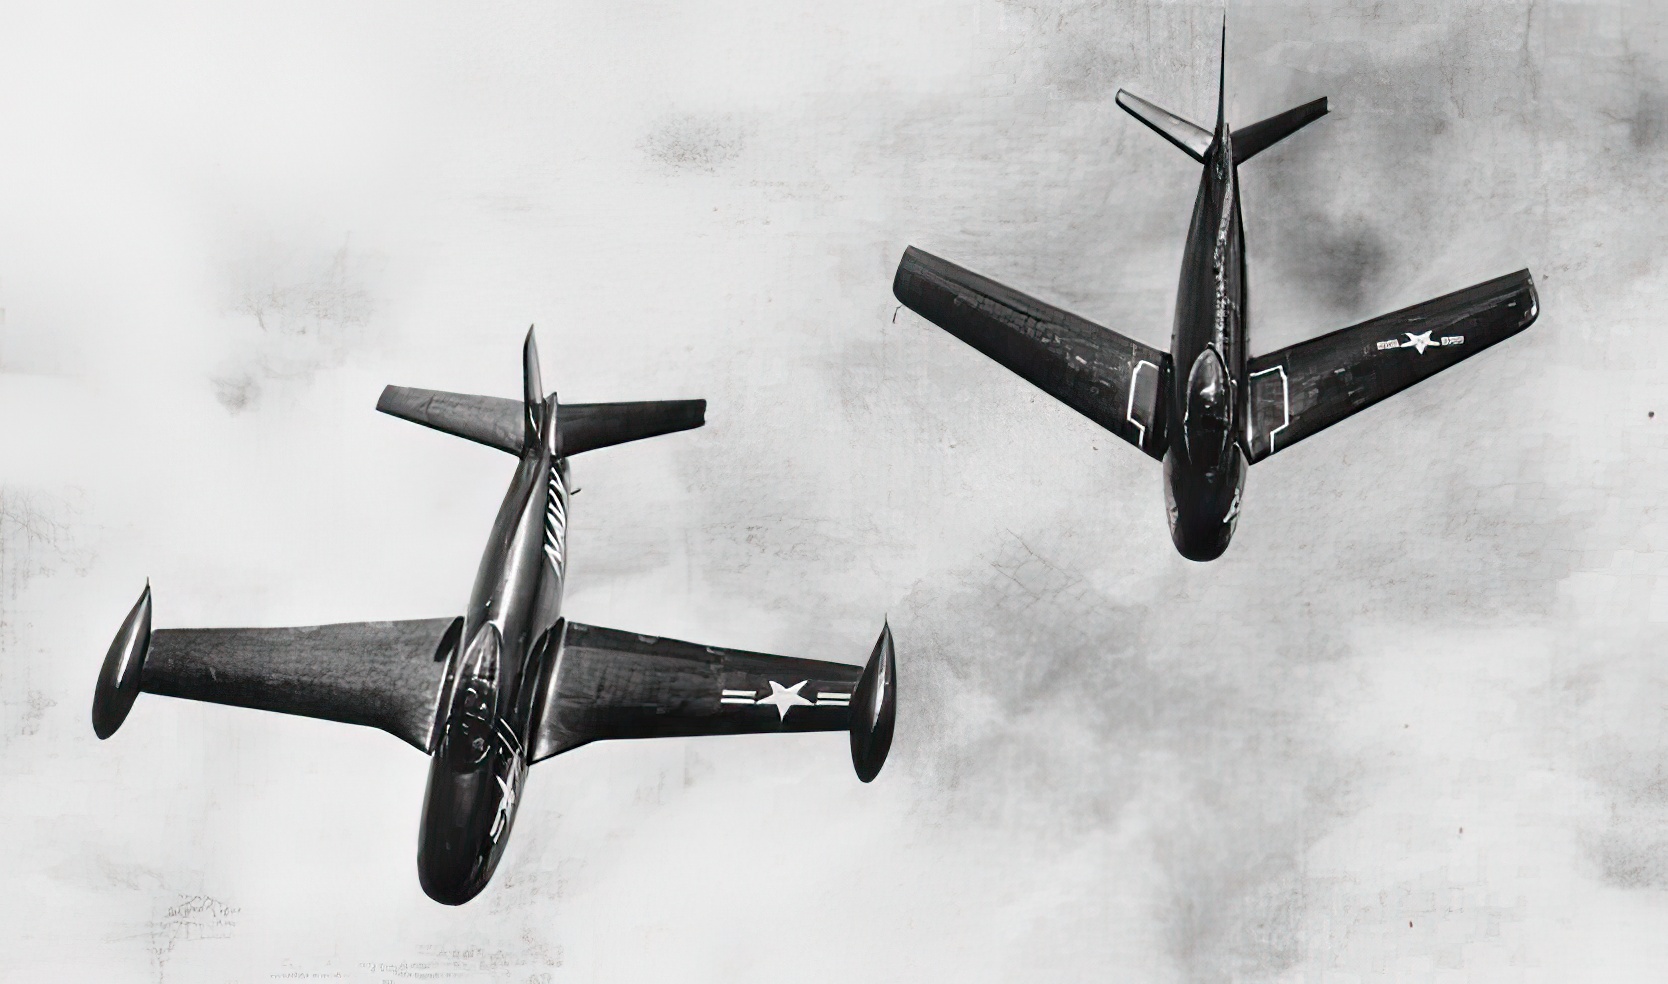 A straight-winged North American FJ-1 flying next to a swept-wing FJ-2 in 1952